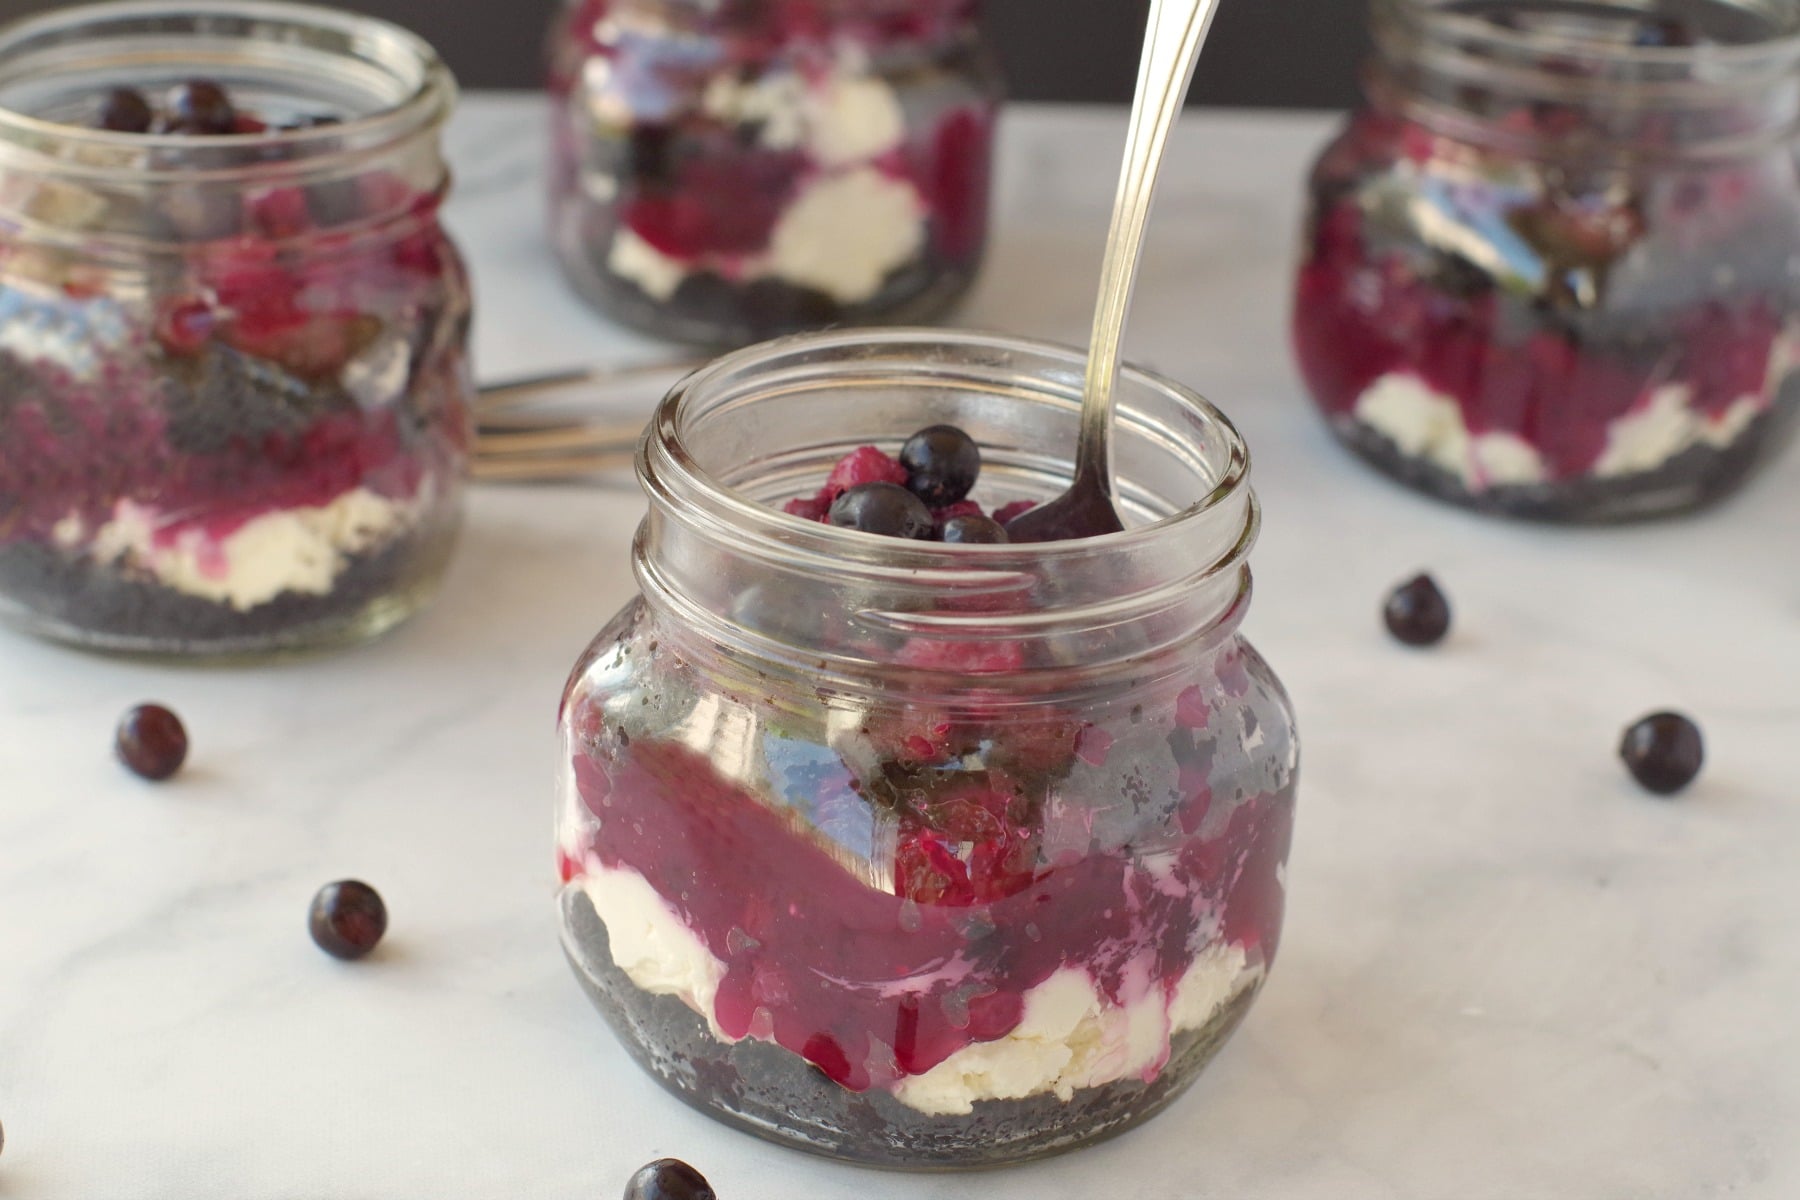 saskatoon berry cheesecake in a jar with a spoon and more jars in the background